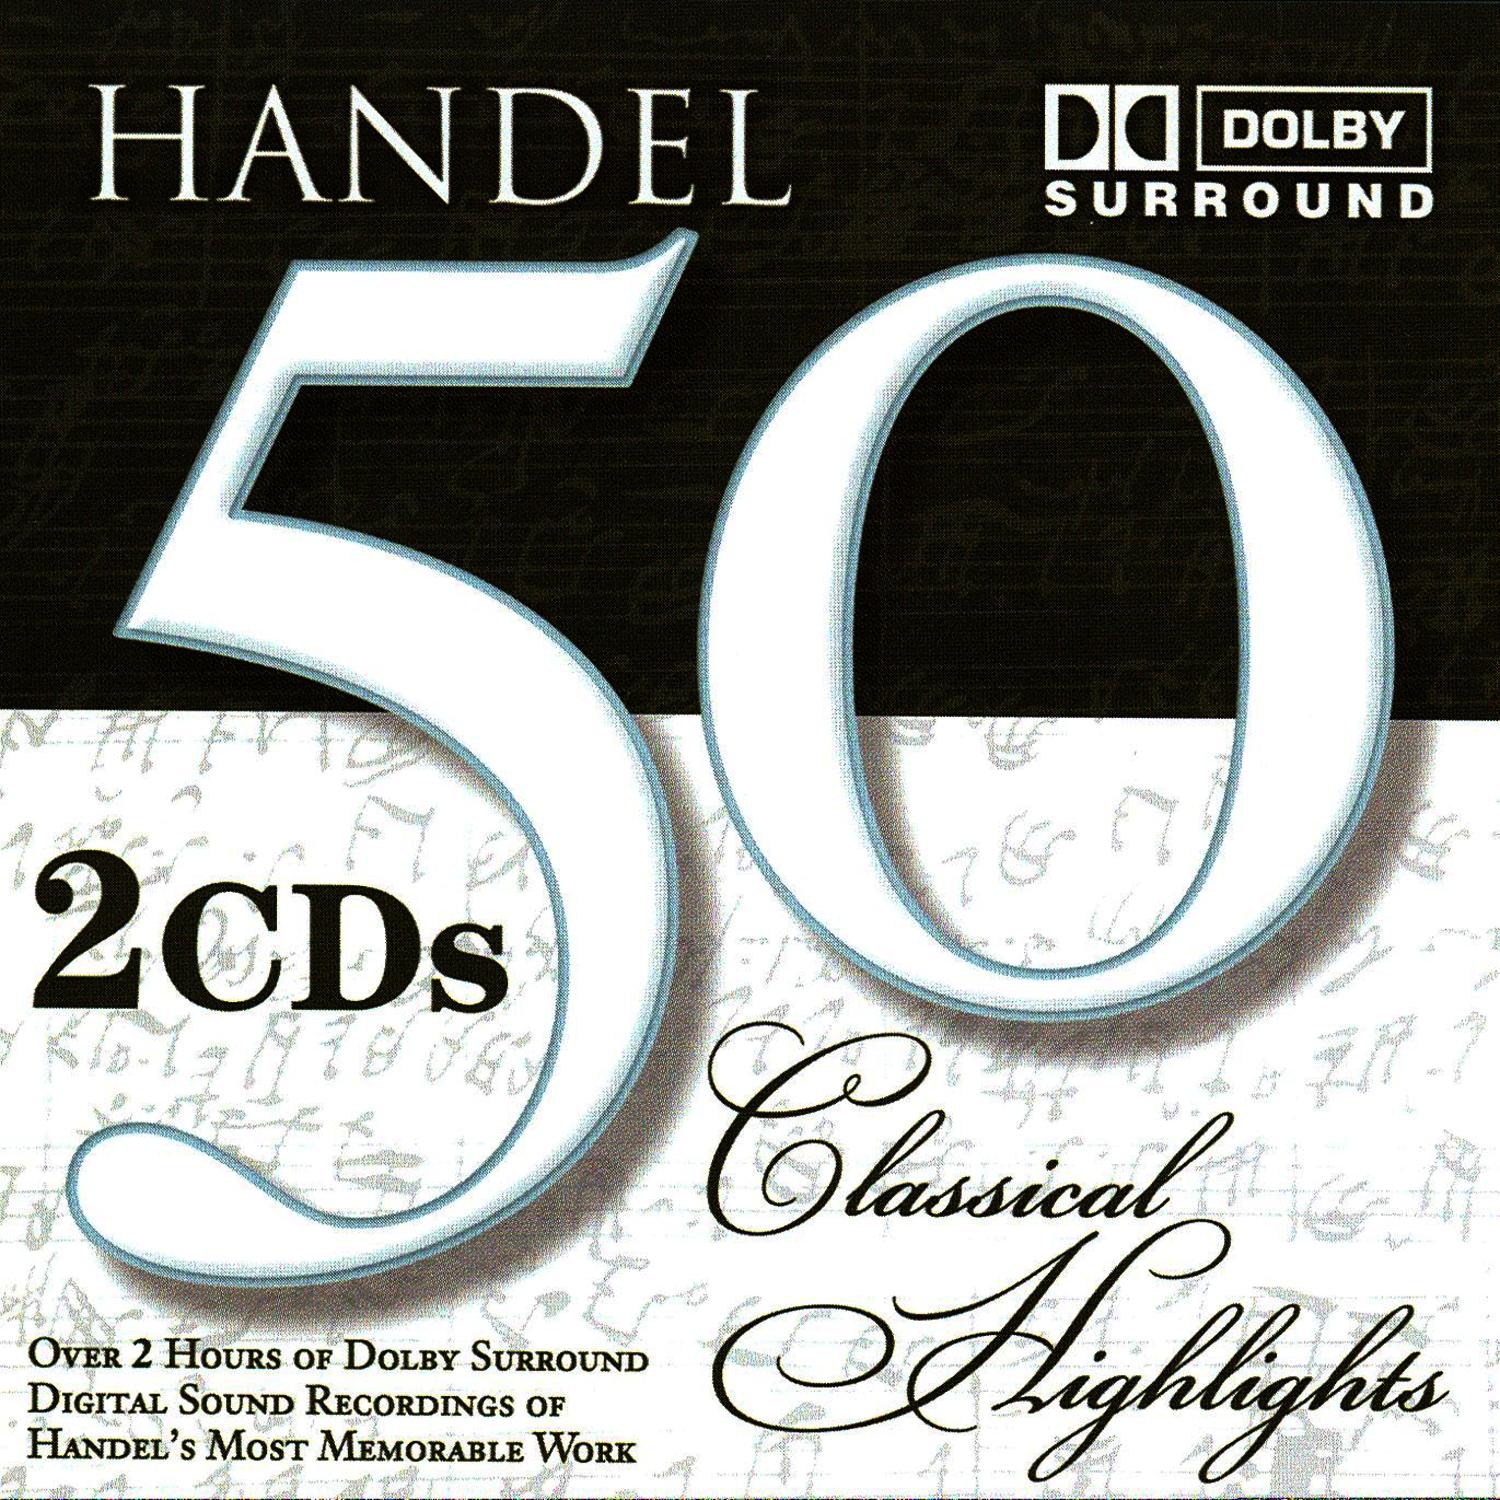 Concerto for Organ and Orchestra No. 10, in D Minor, Op. 7, 4 - Organo ad libitum